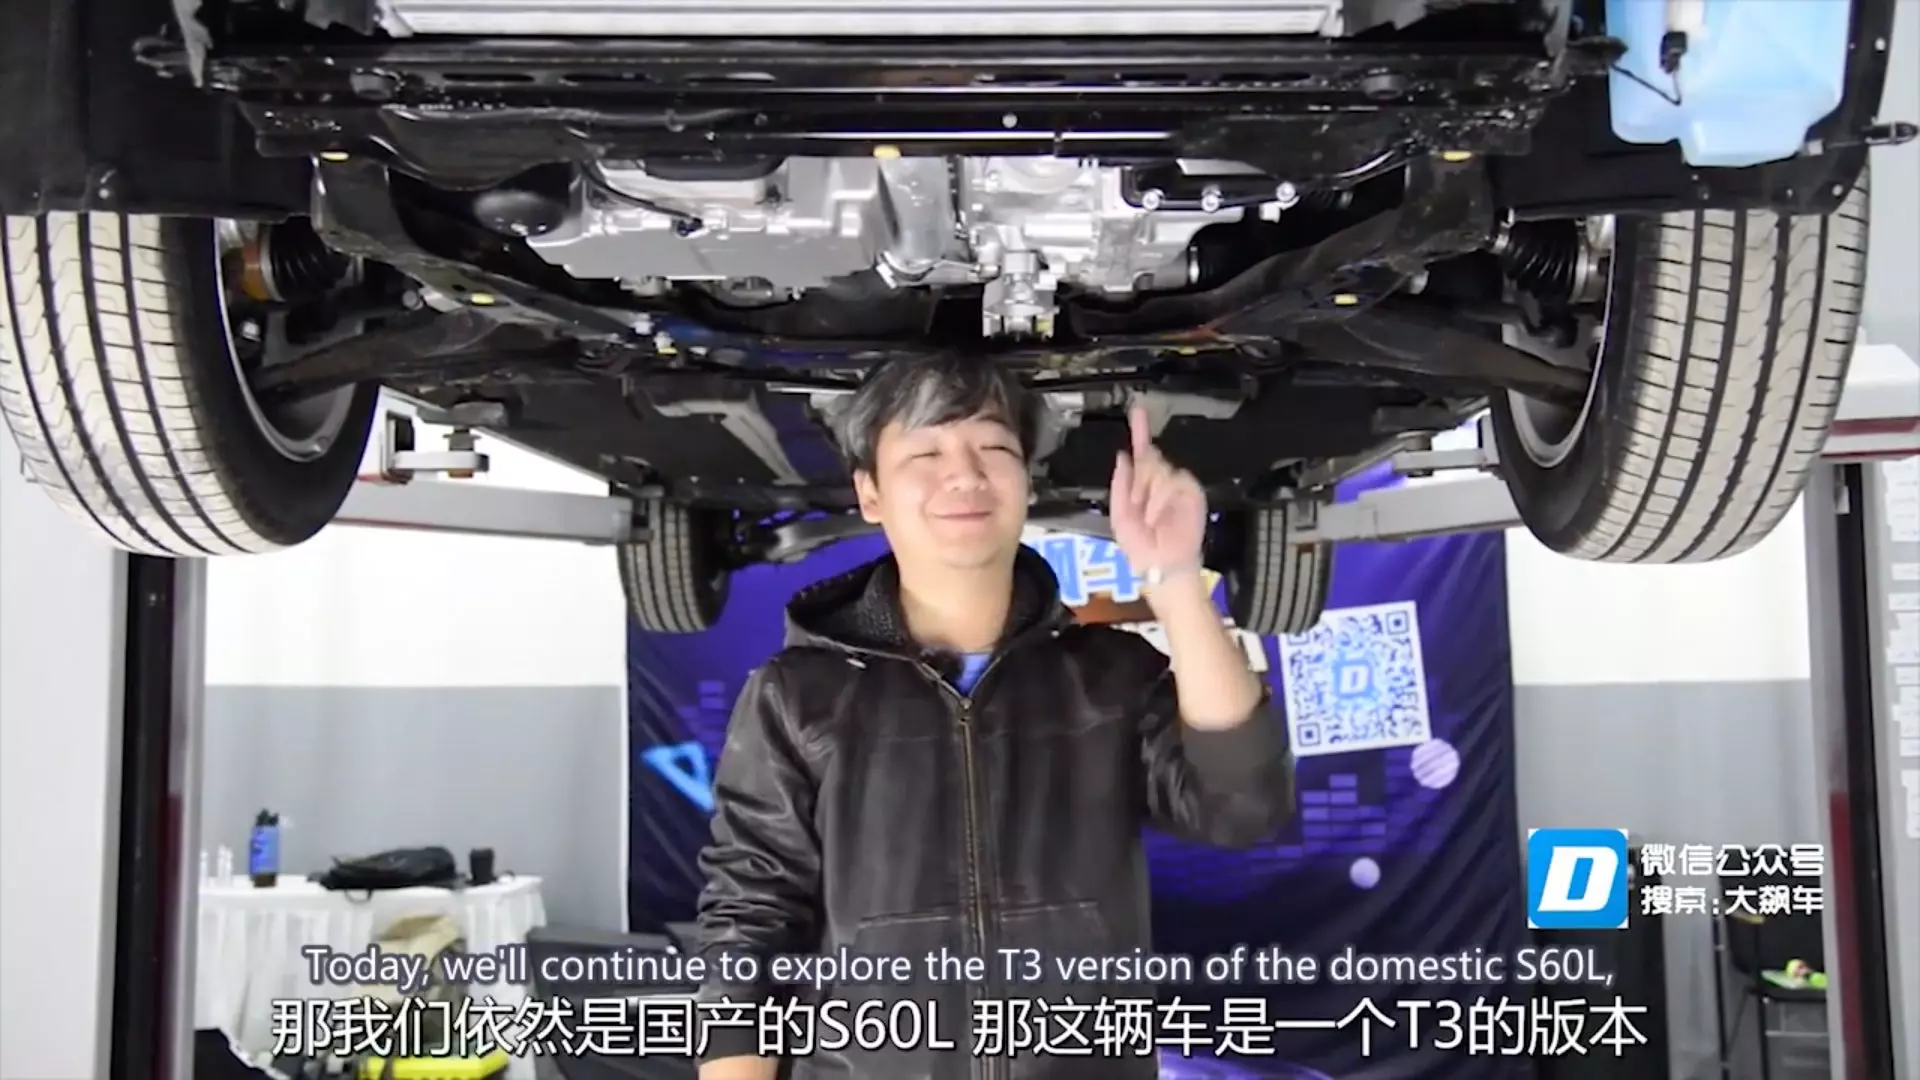 Check Out These Detailed Automotive Engineering Breakdowns From A Chinese Perspective | Autance